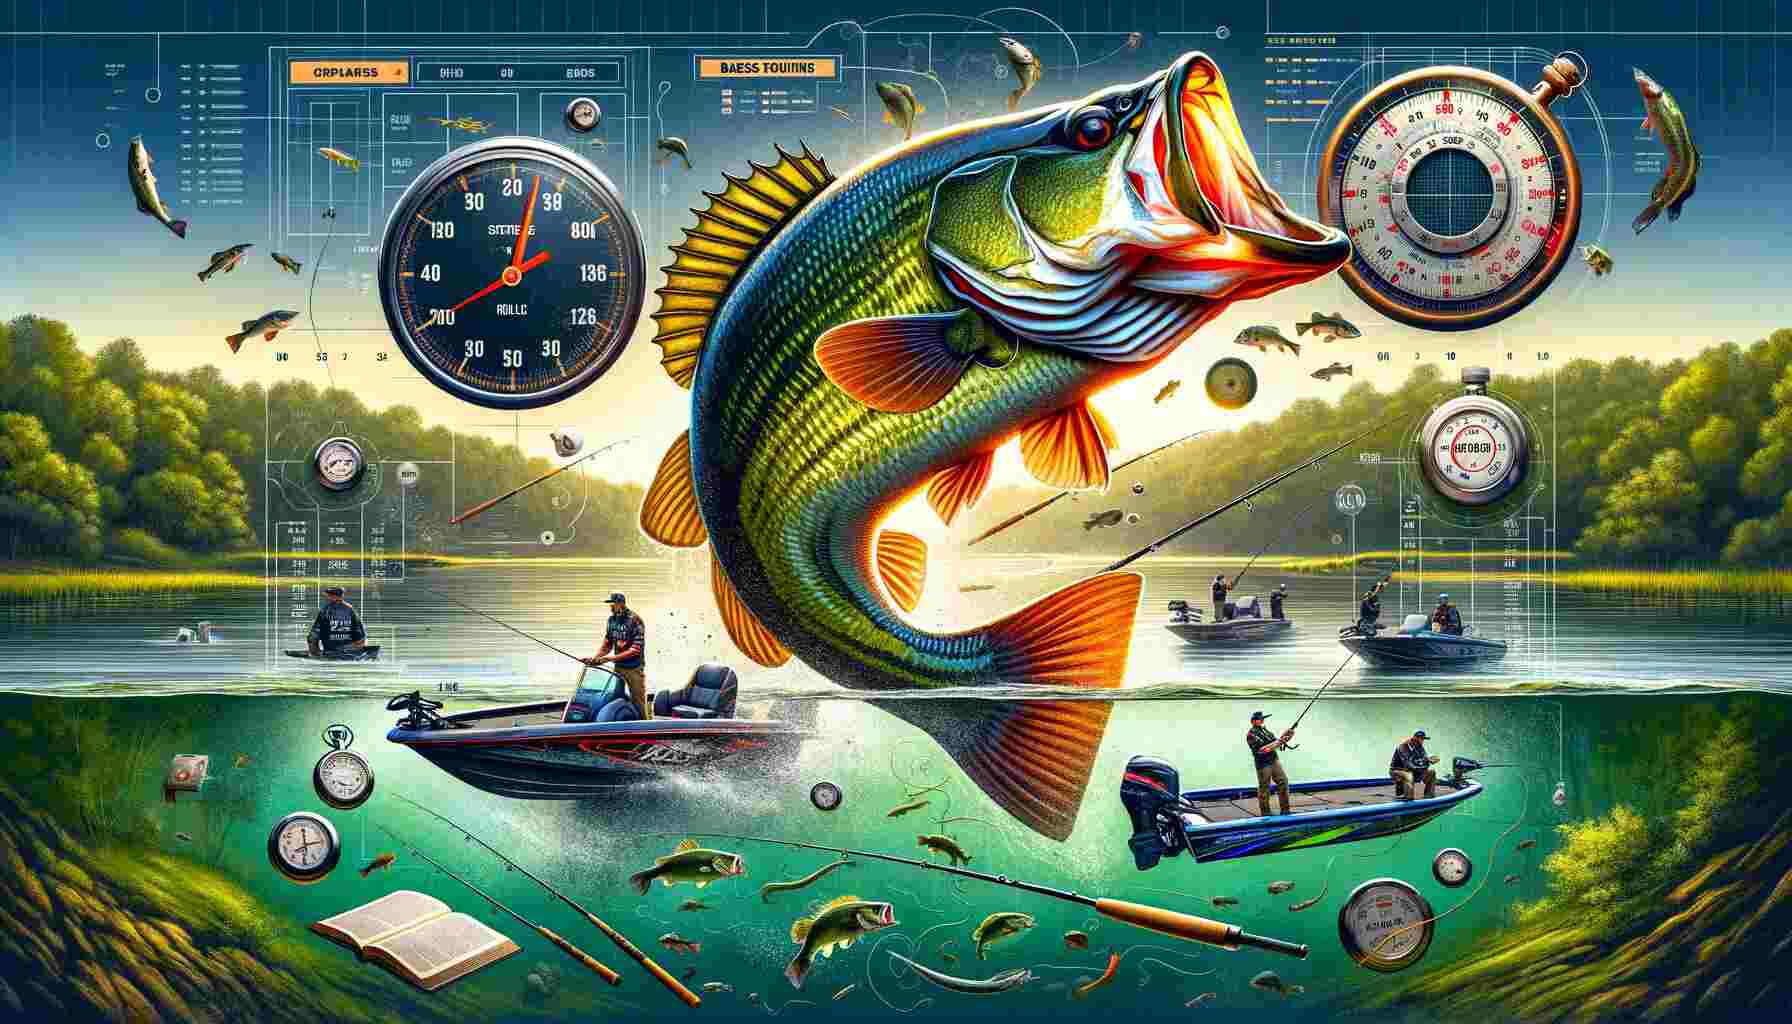 "An energetic bass fish leaping from the water at the center, surrounded by fishing tournament elements like rods, a stopwatch, a rulebook, and a scoreboard with names and scores. The background shows a tranquil lake with fishing boats and anglers, set against lush greenery and a clear blue sky, emphasizing the competitive and outdoor atmosphere of bass fishing tournaments.